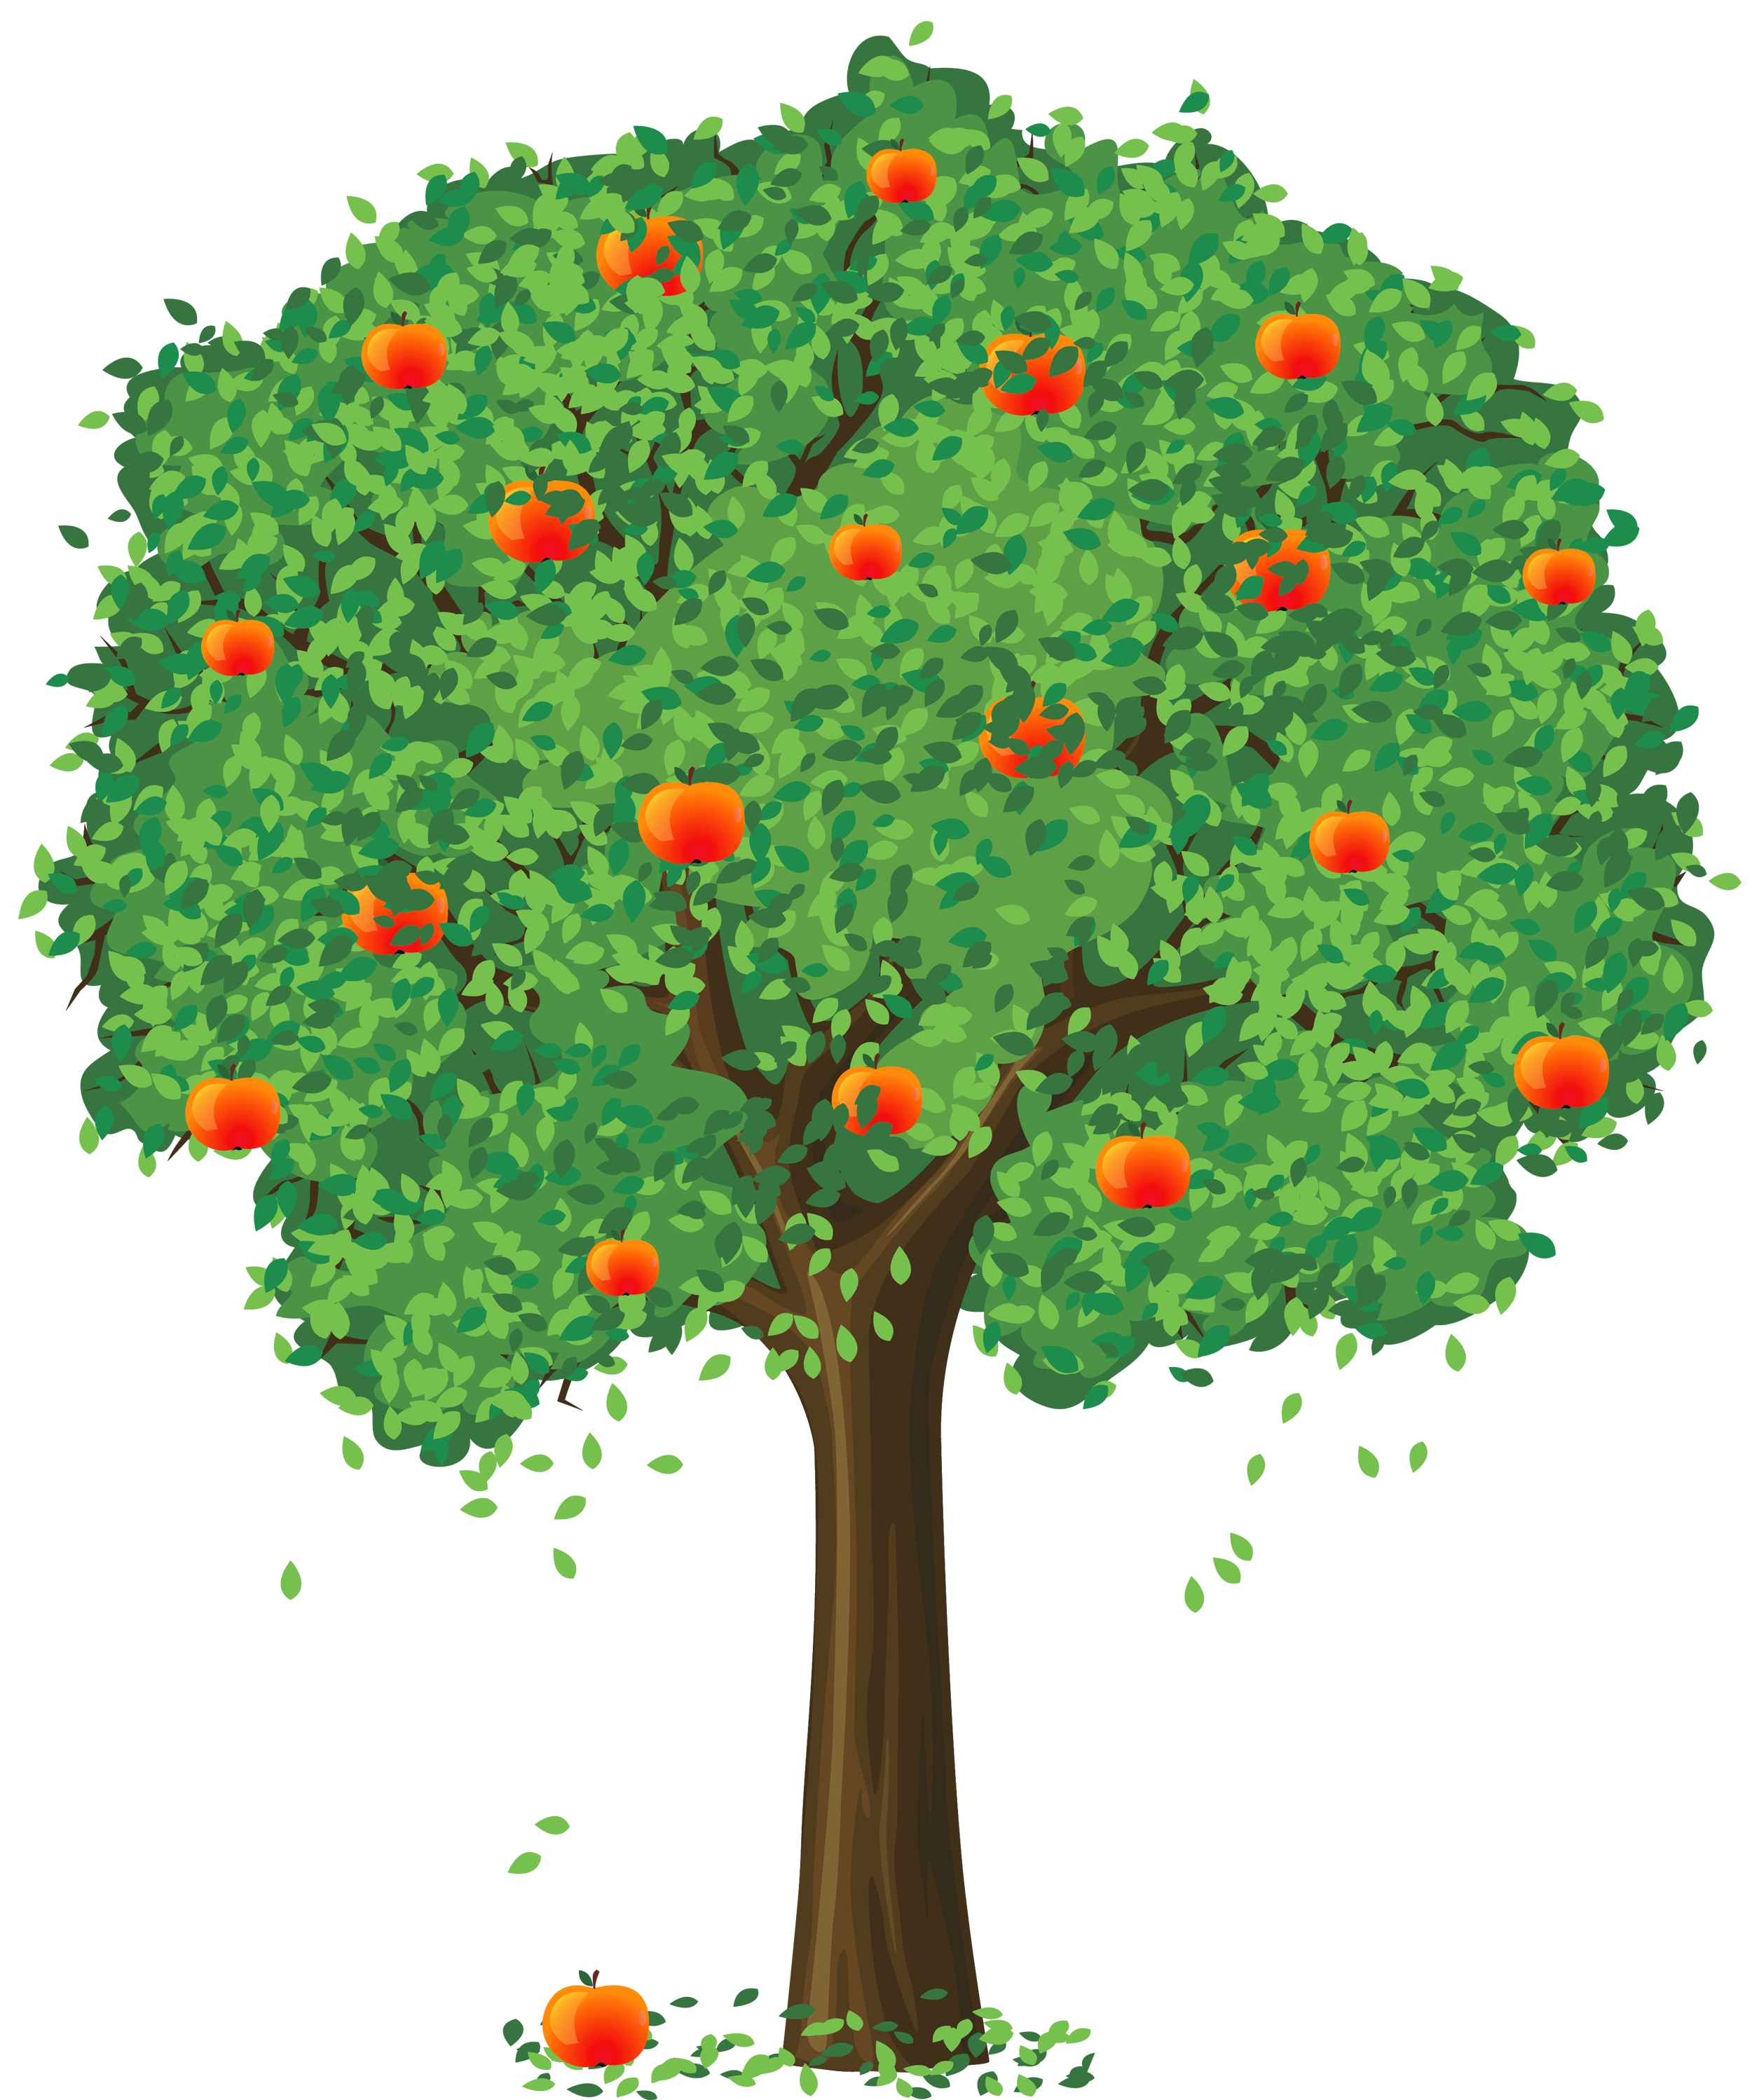 11 Cartoon Orange Tree Free Cliparts That You Can Download To You